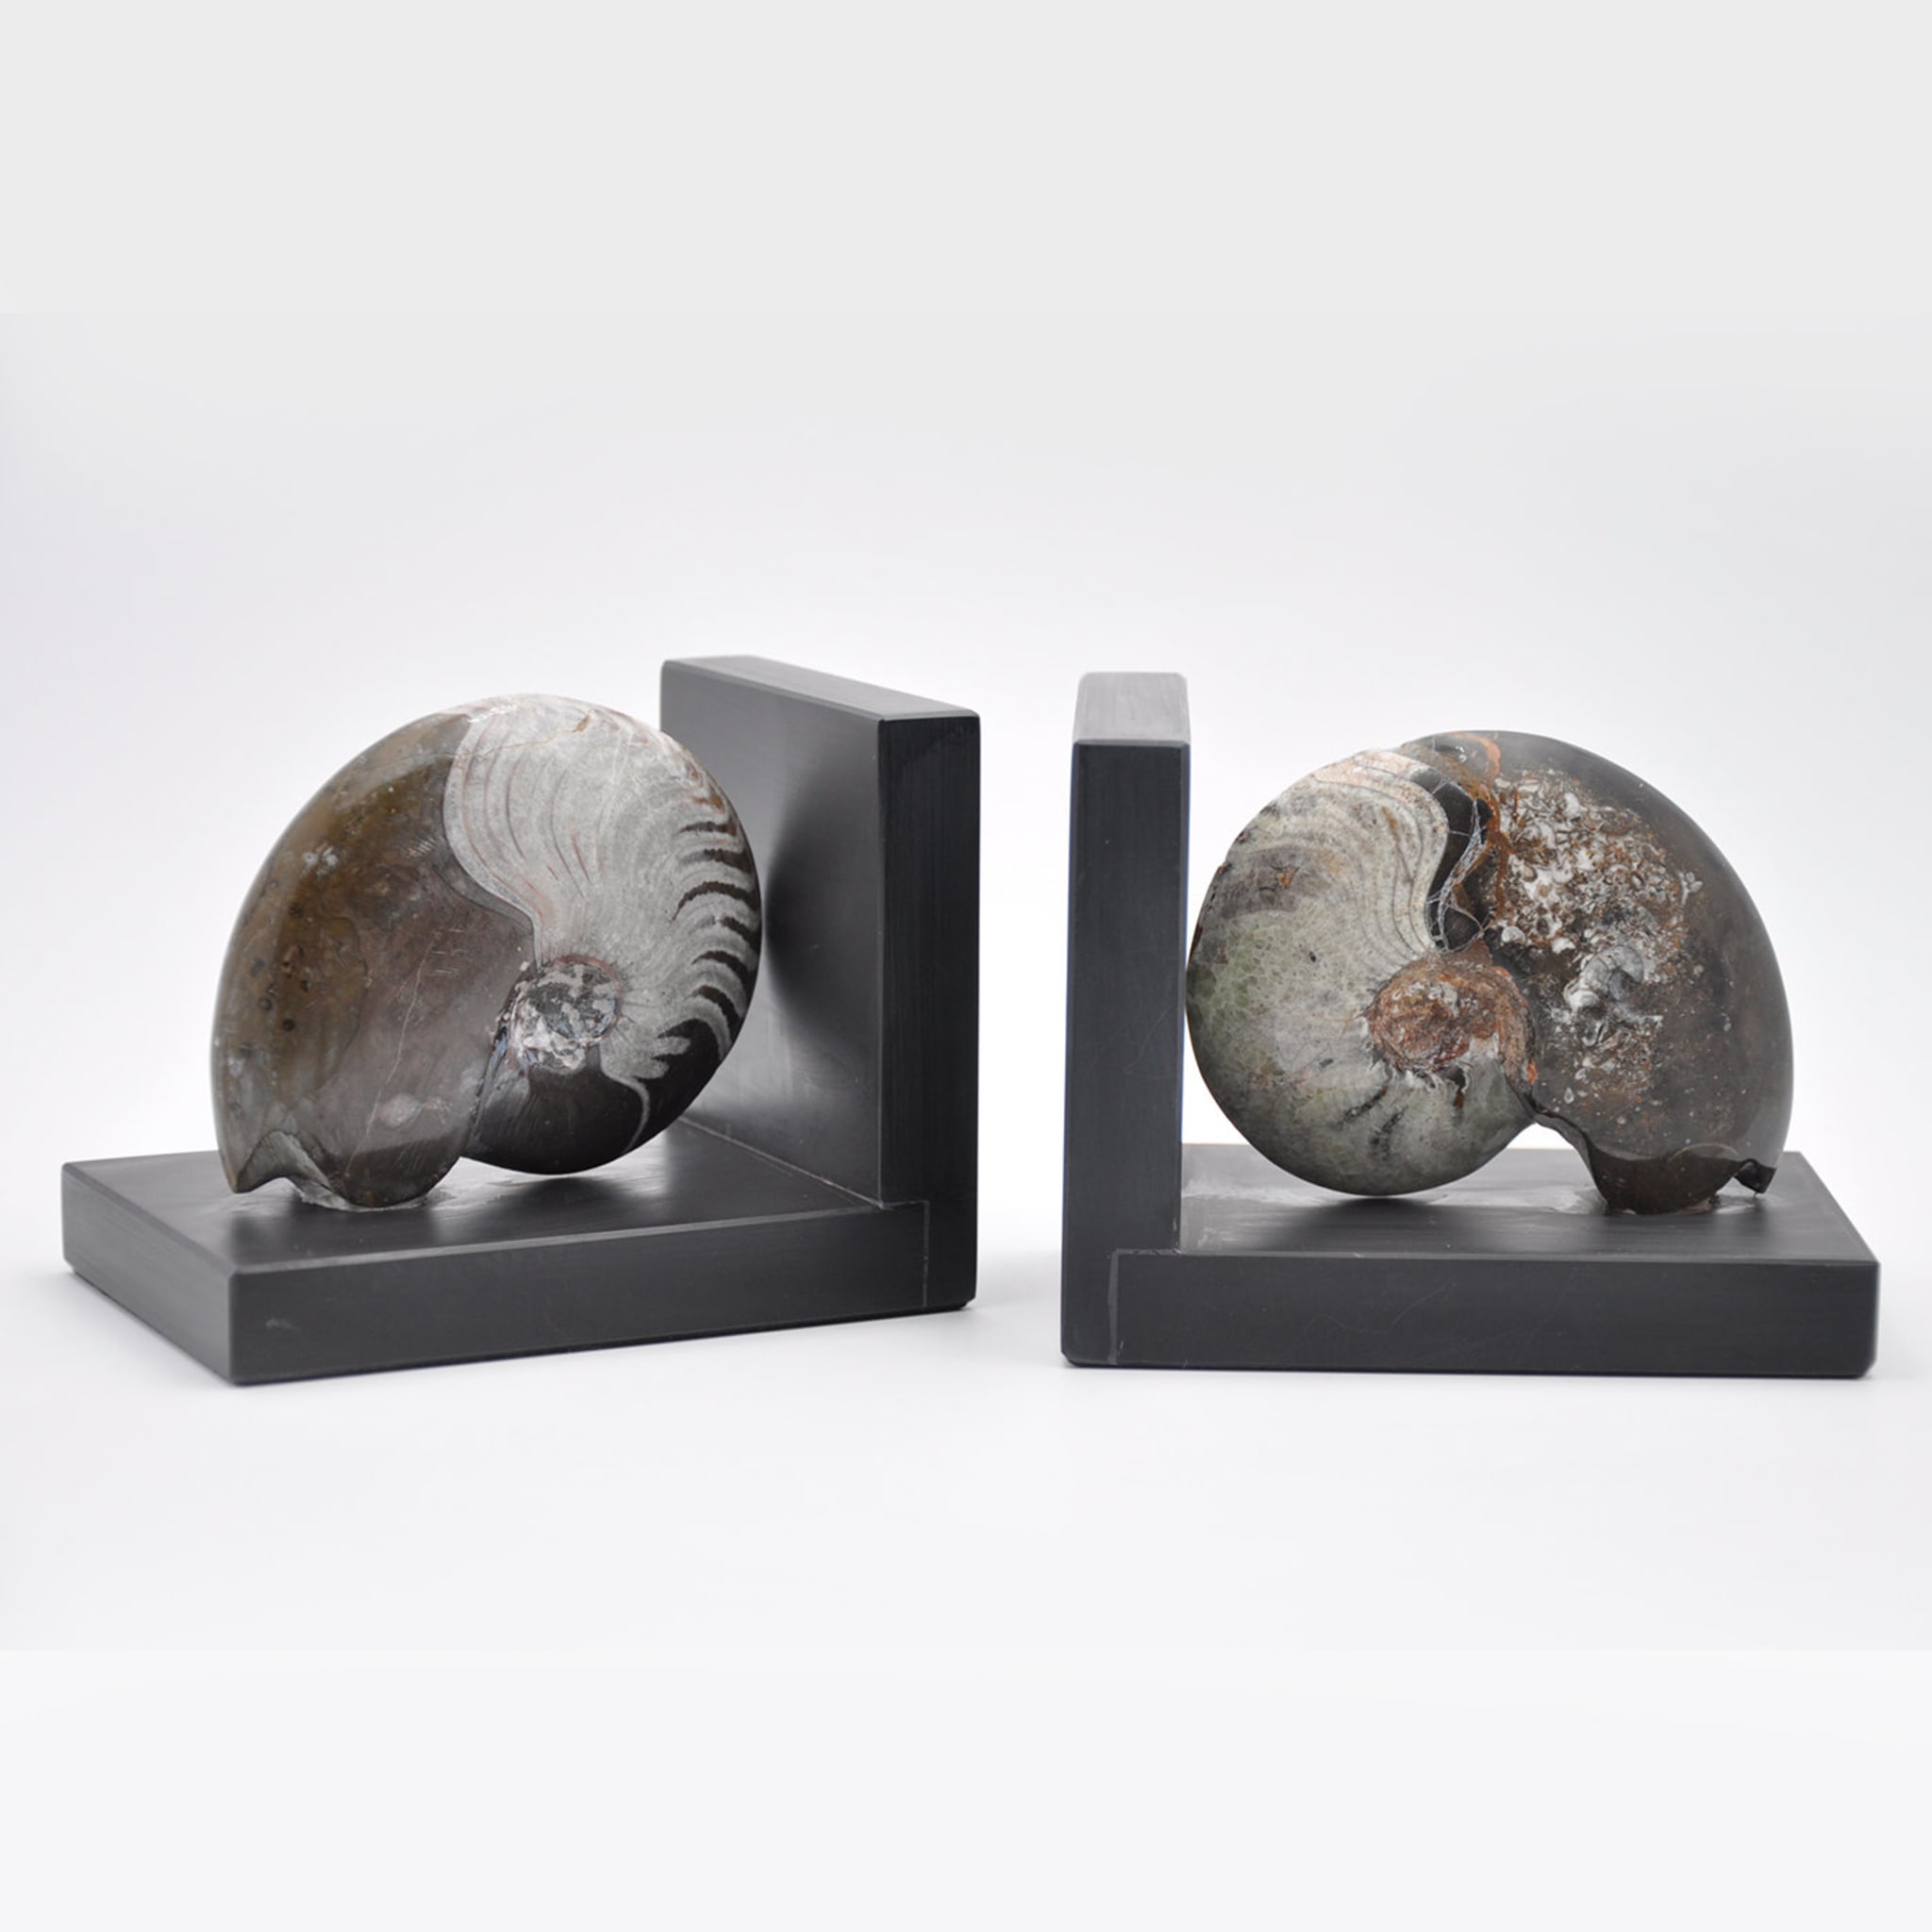 Fossiline Bookends sculpture #4 by Nino Basso - Alternative view 1